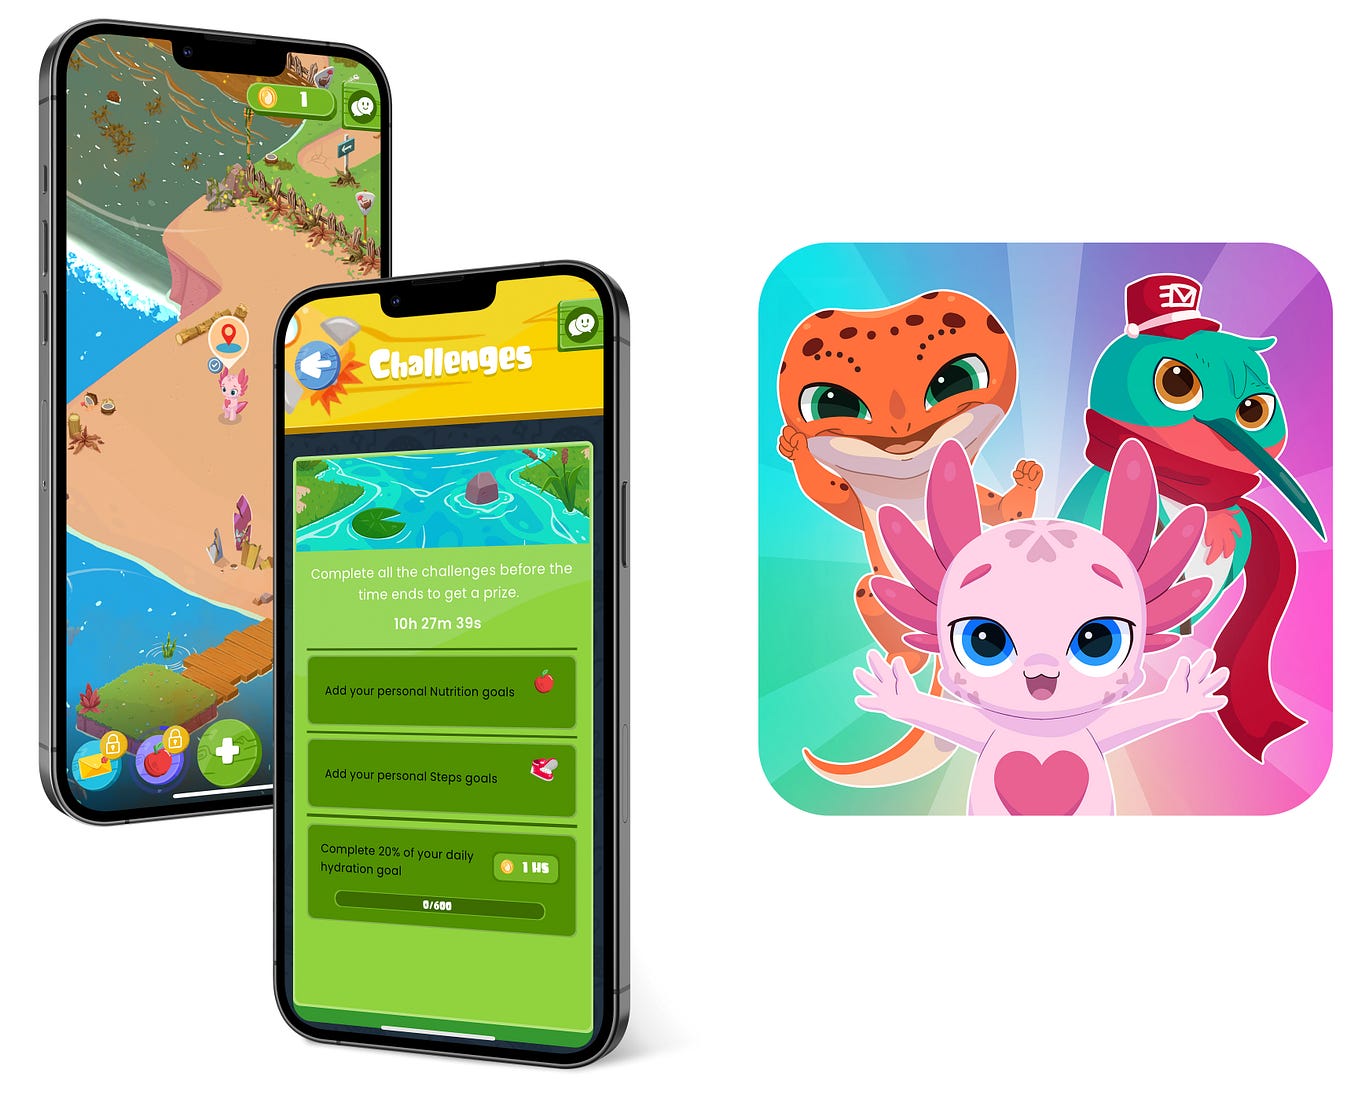 Pink Salamanders & Blockchain: A Match Made in Health Gaming Heaven! 🦎💖